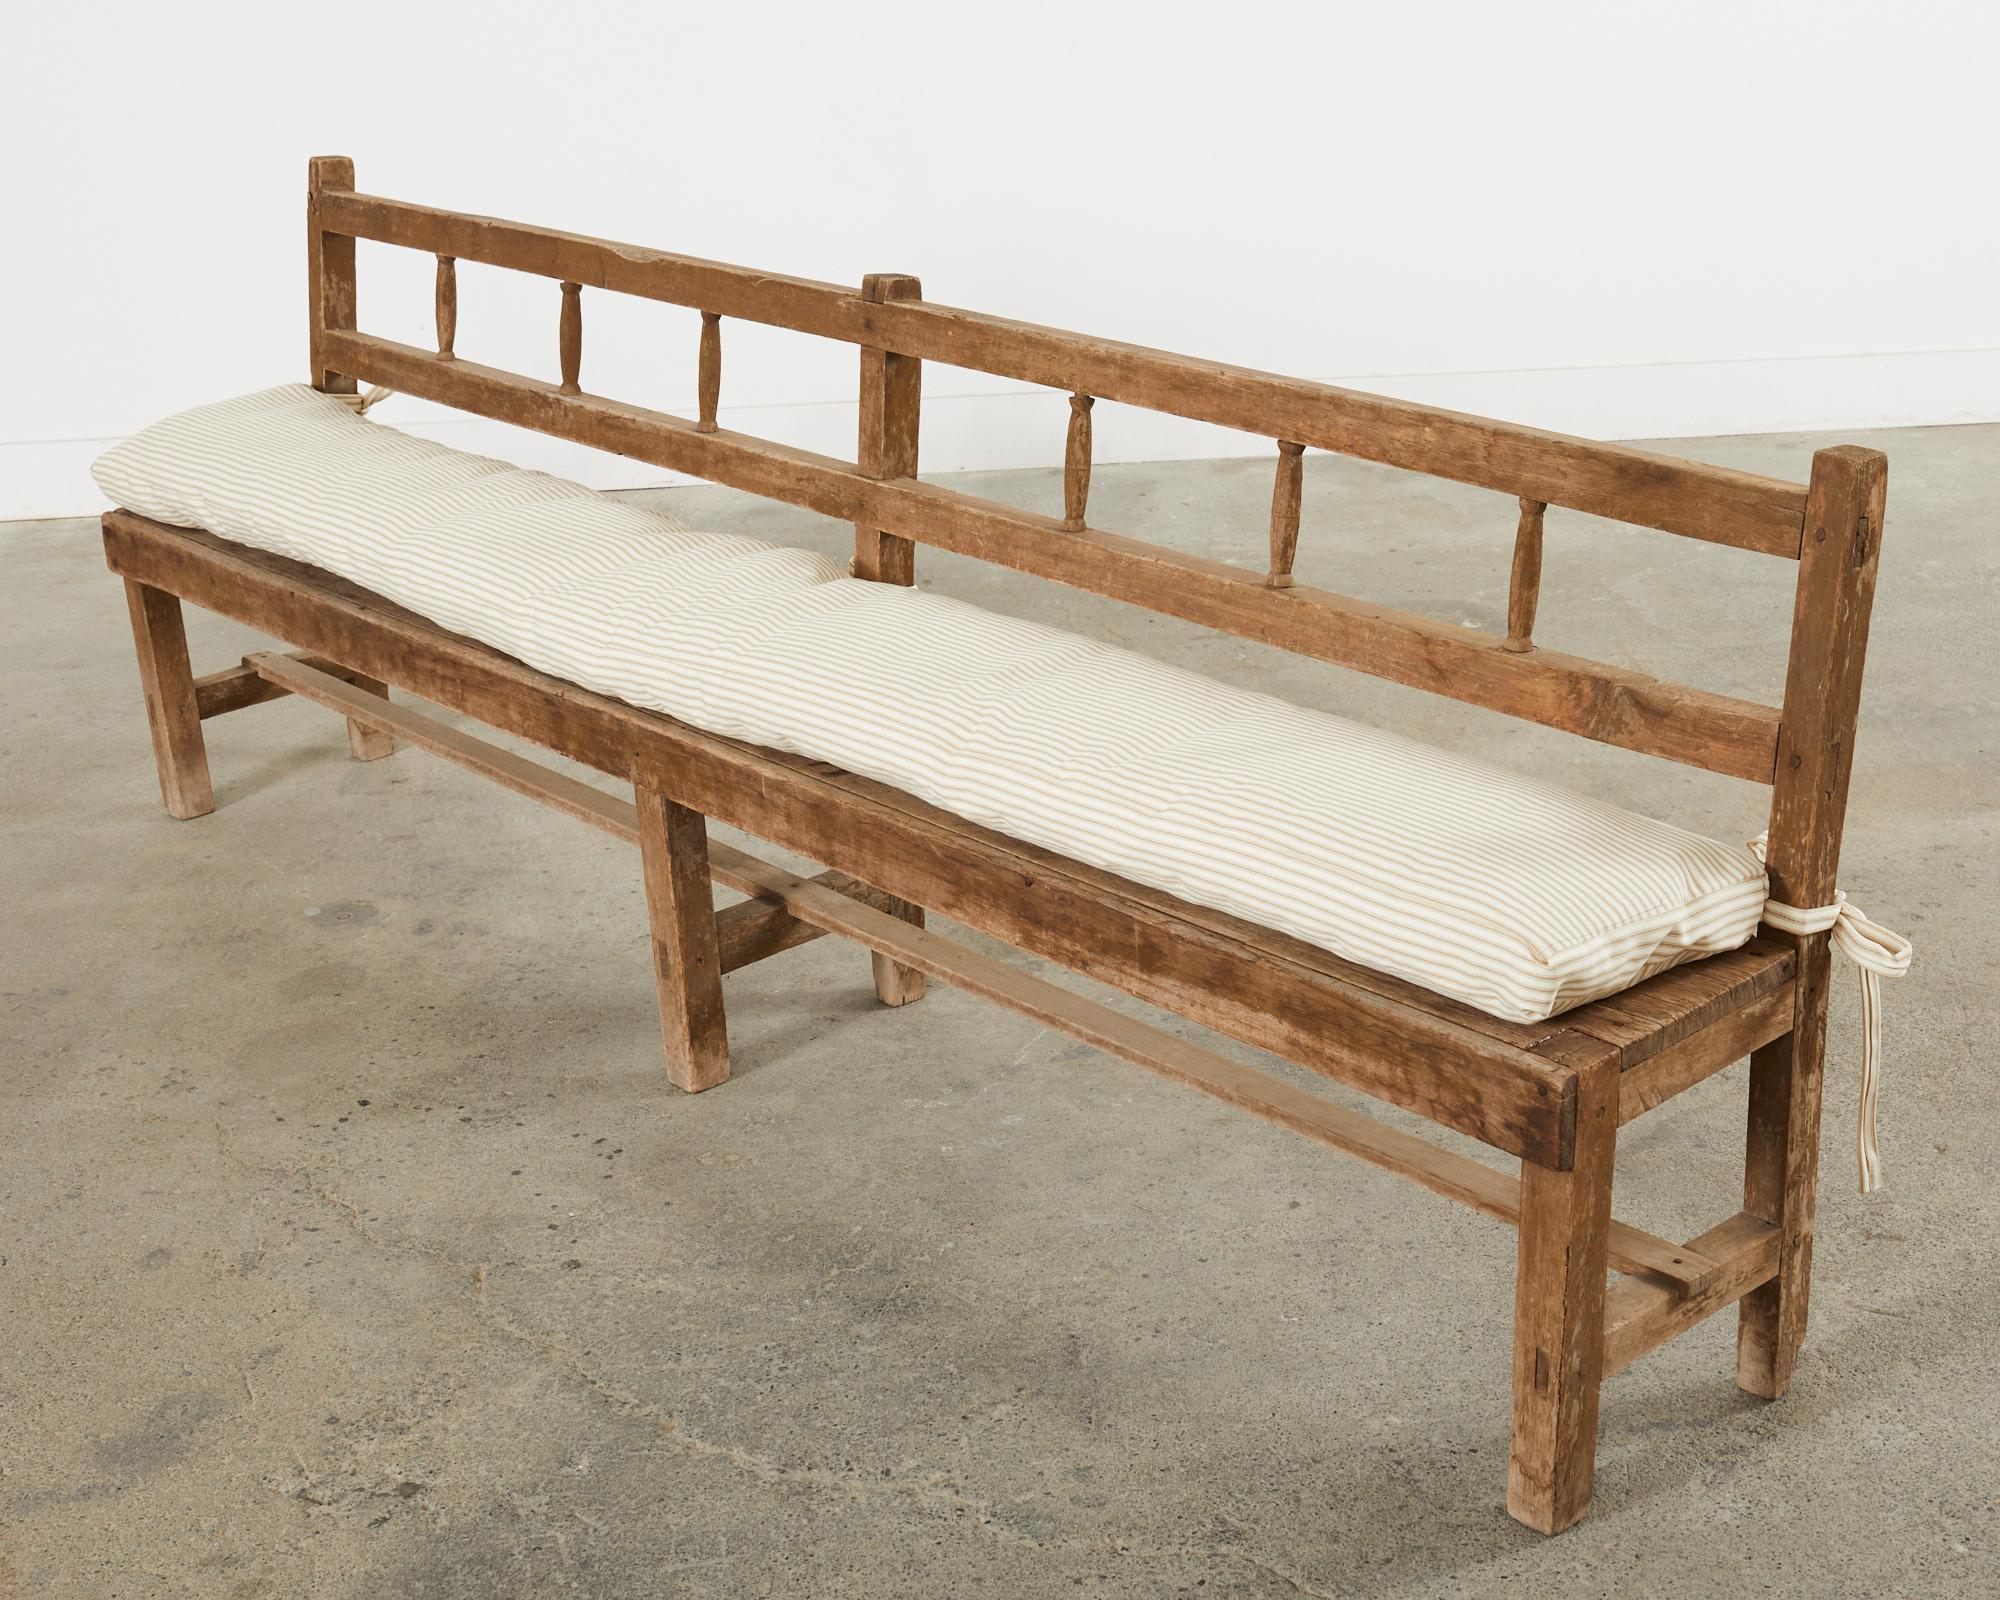 Hand-Crafted Rustic Country English Provincial Pine Bench Seat